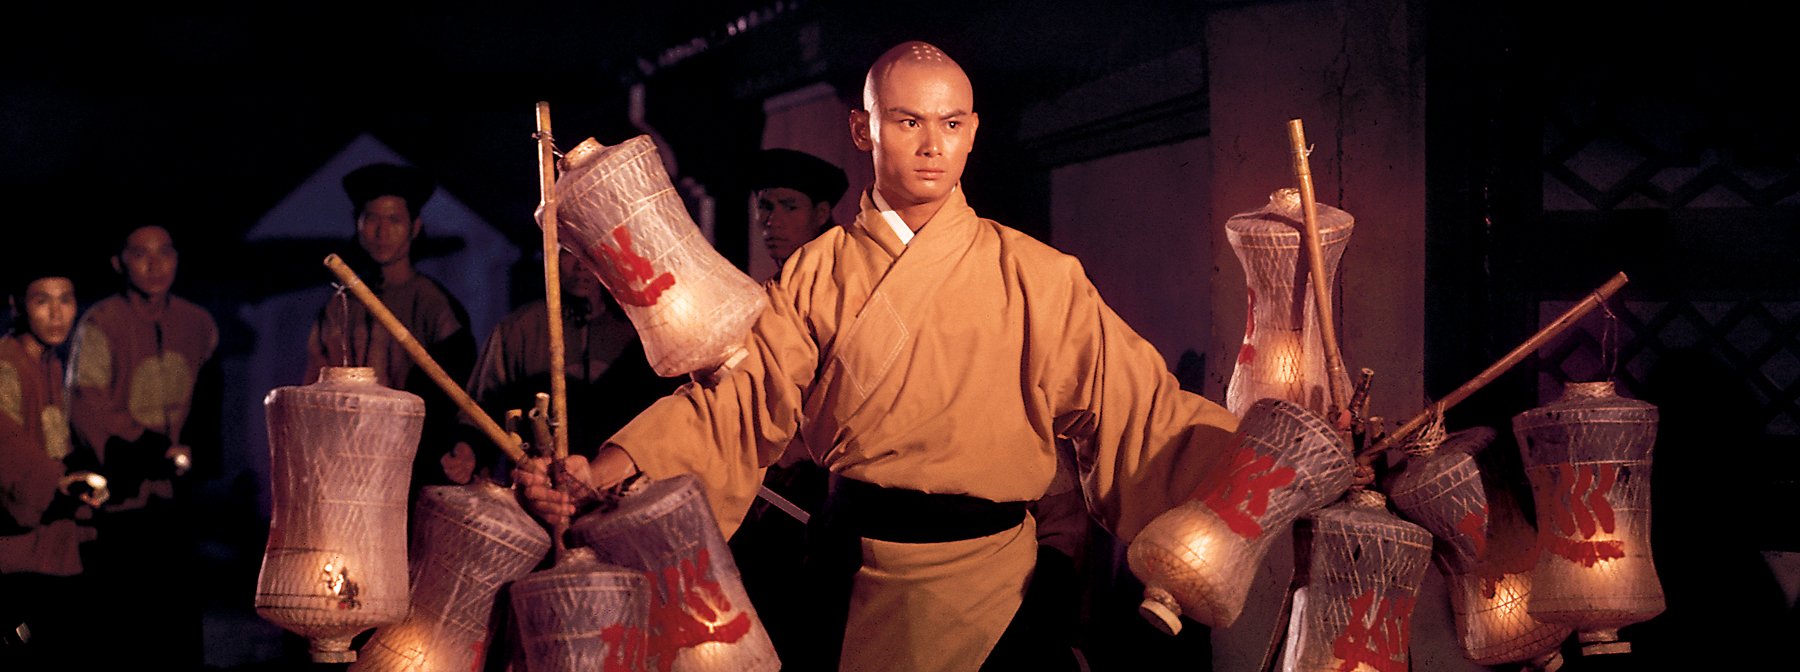 Scene from The 36th Chamber of Shaolin (1978)